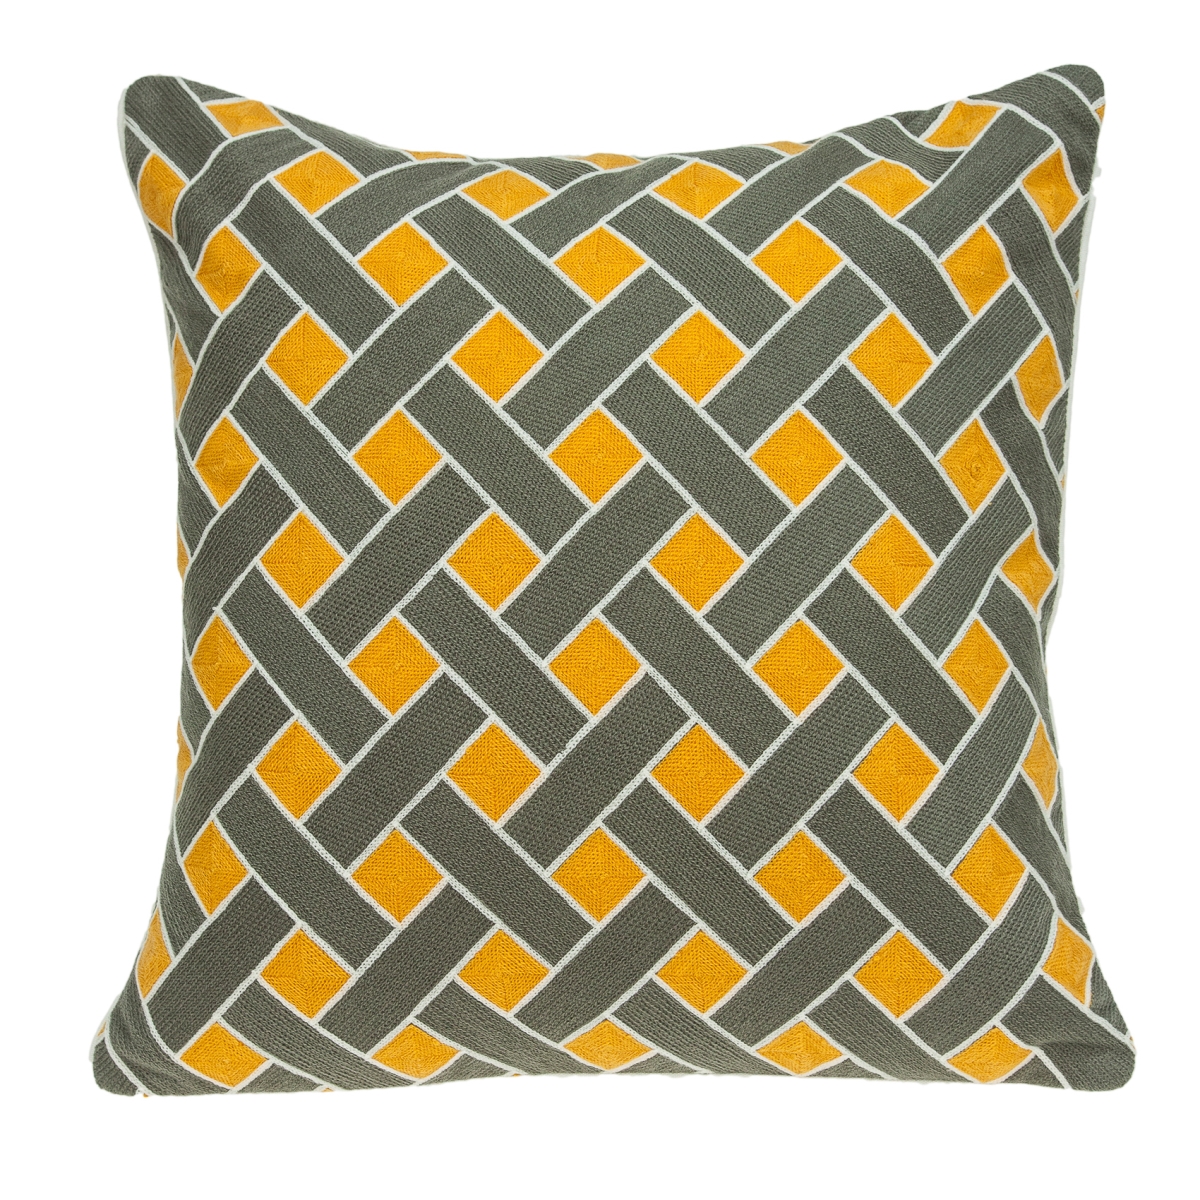 Pila11004p Kain Grey, Orange & White Square Transitional Pillow Cover With Poly Insert - 20 X 20 X 7 In.